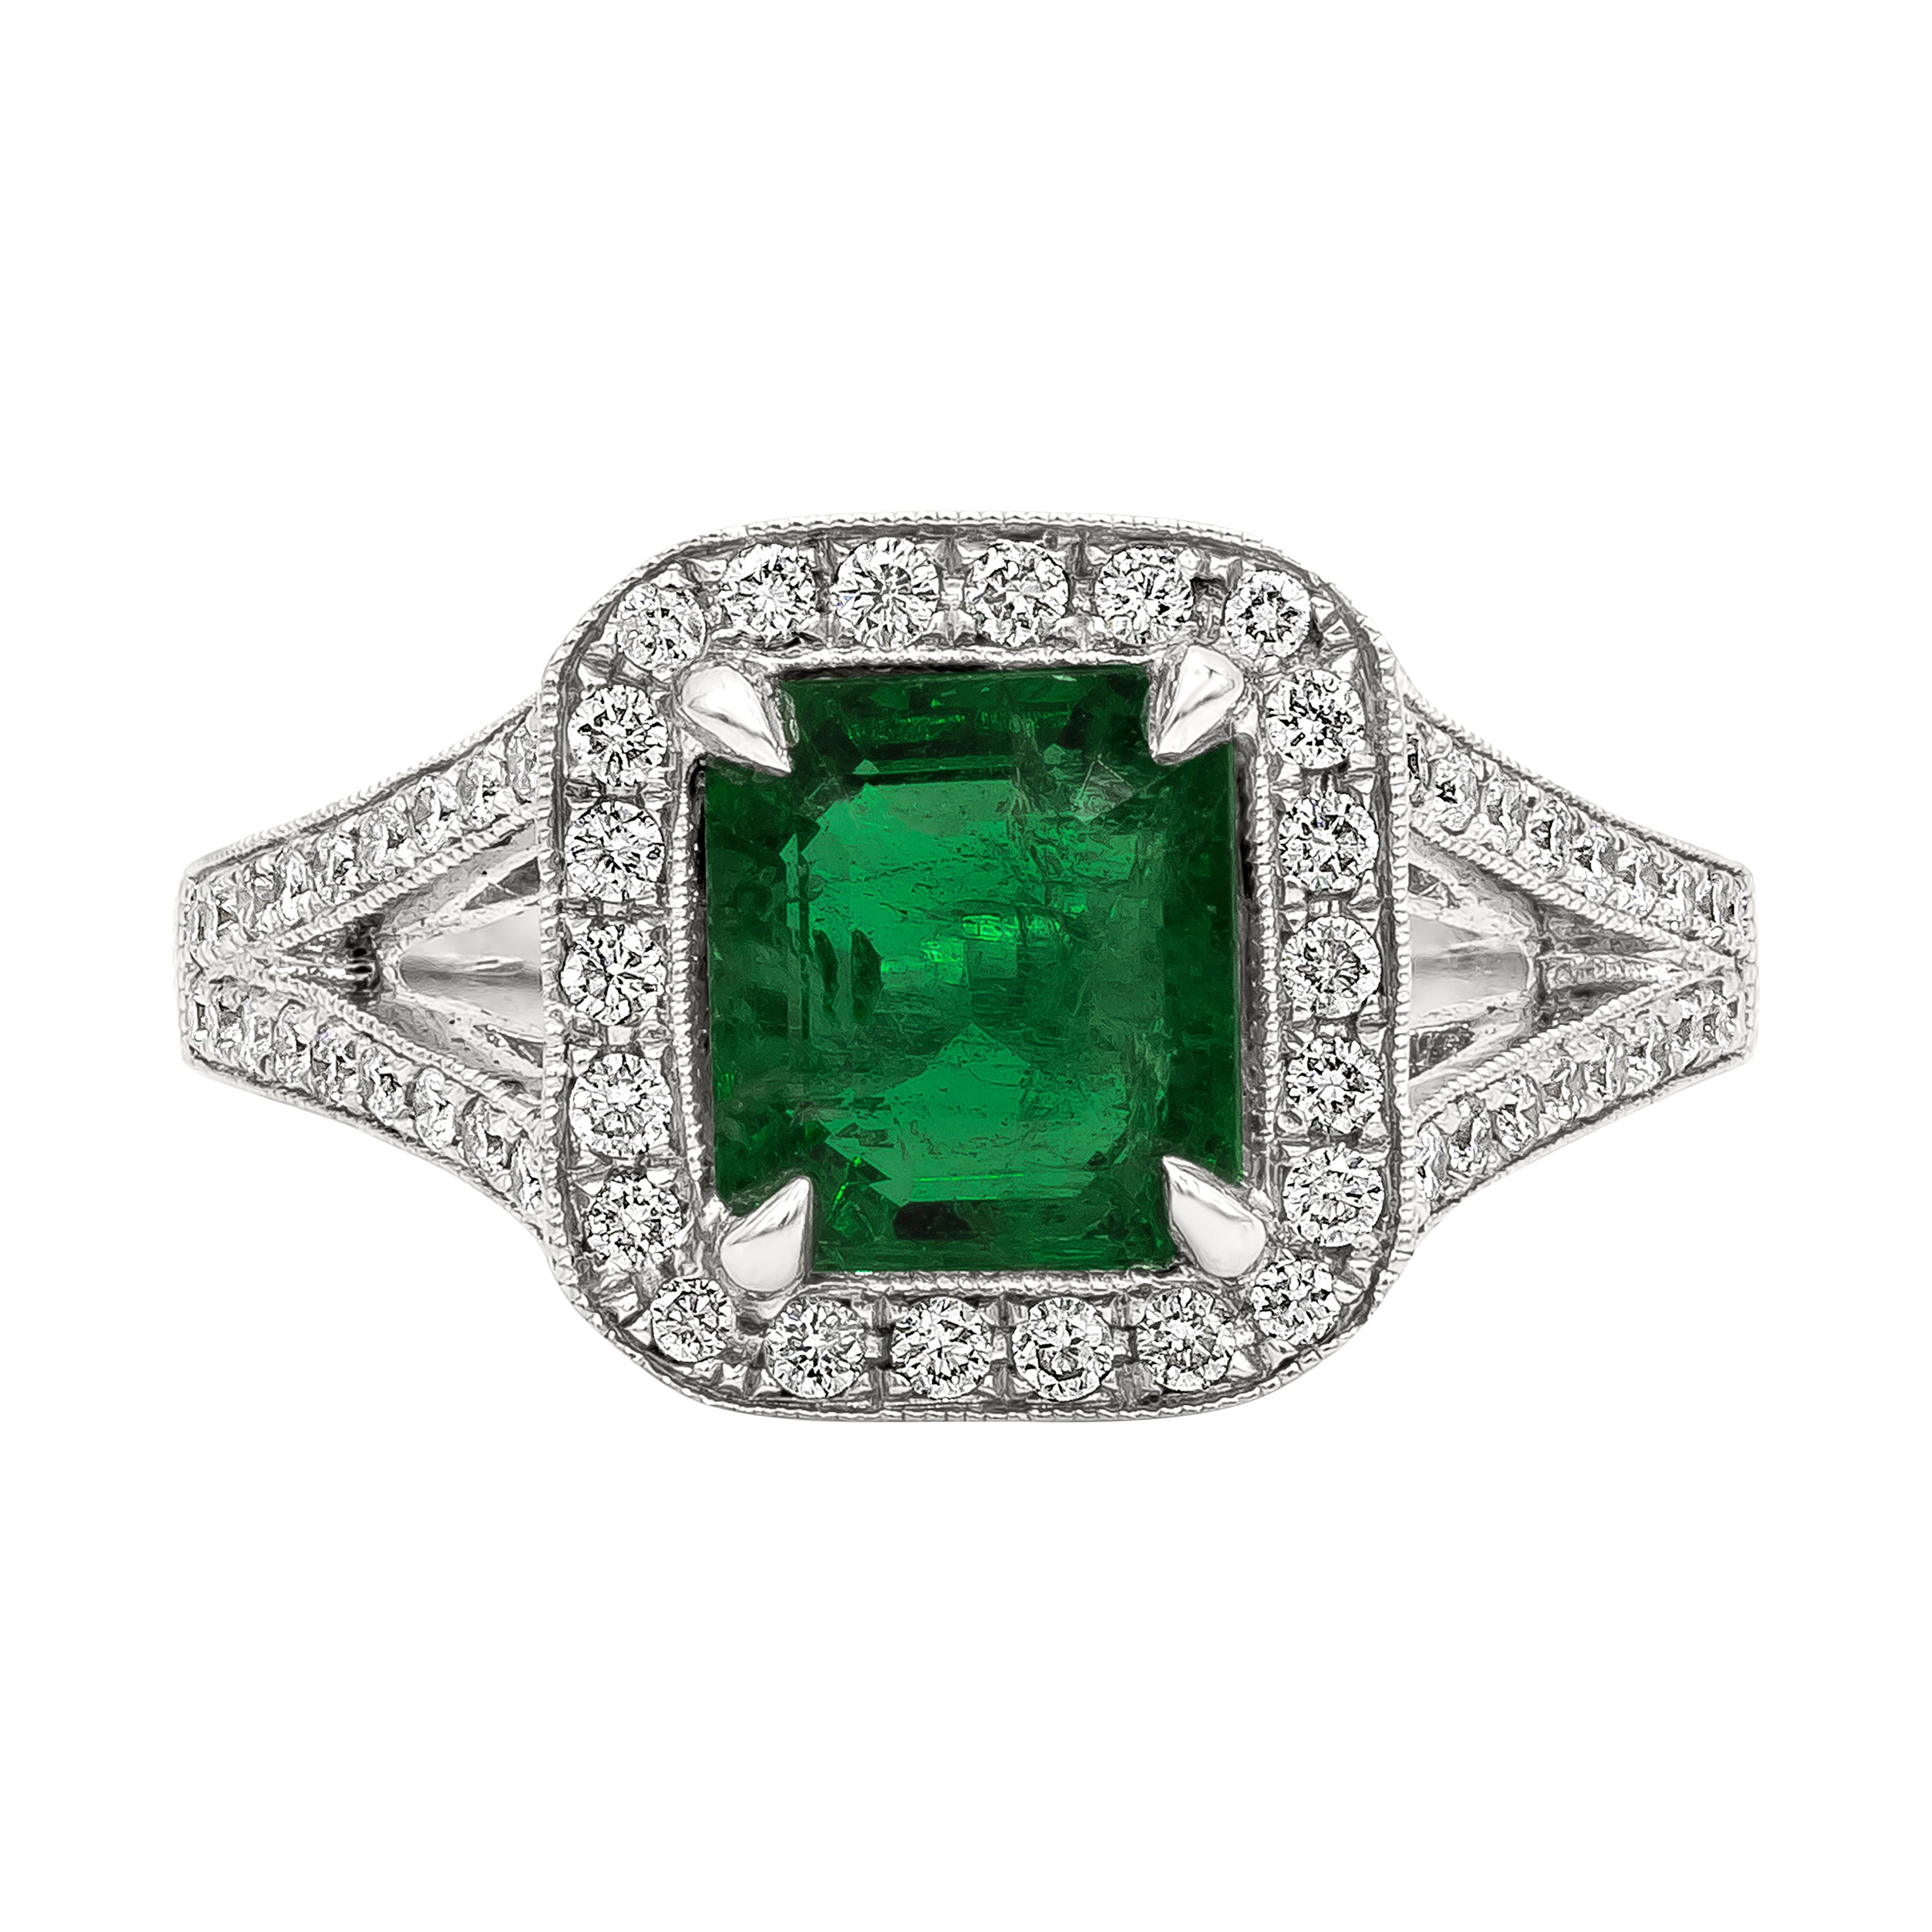 Roman Malakov 1.68 Carats Emerald Cut Emerald with Diamond Halo Engagement Ring For Sale